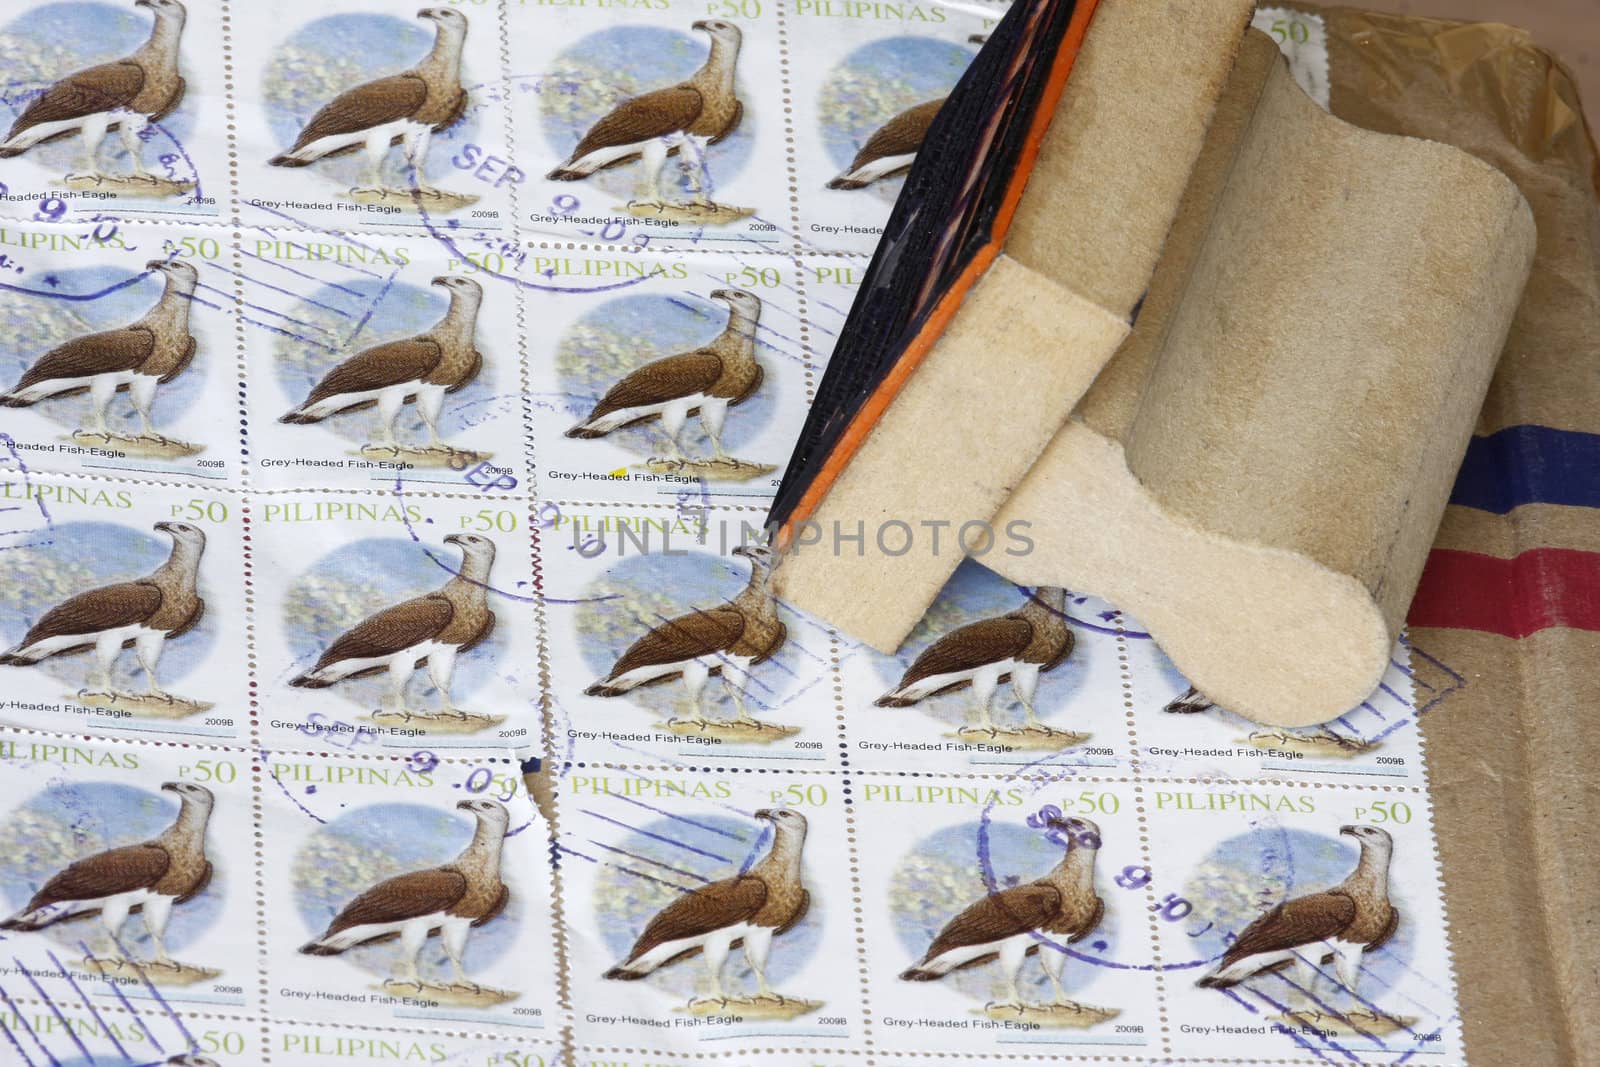 Manila cancel stamps in a box with ink stamp.